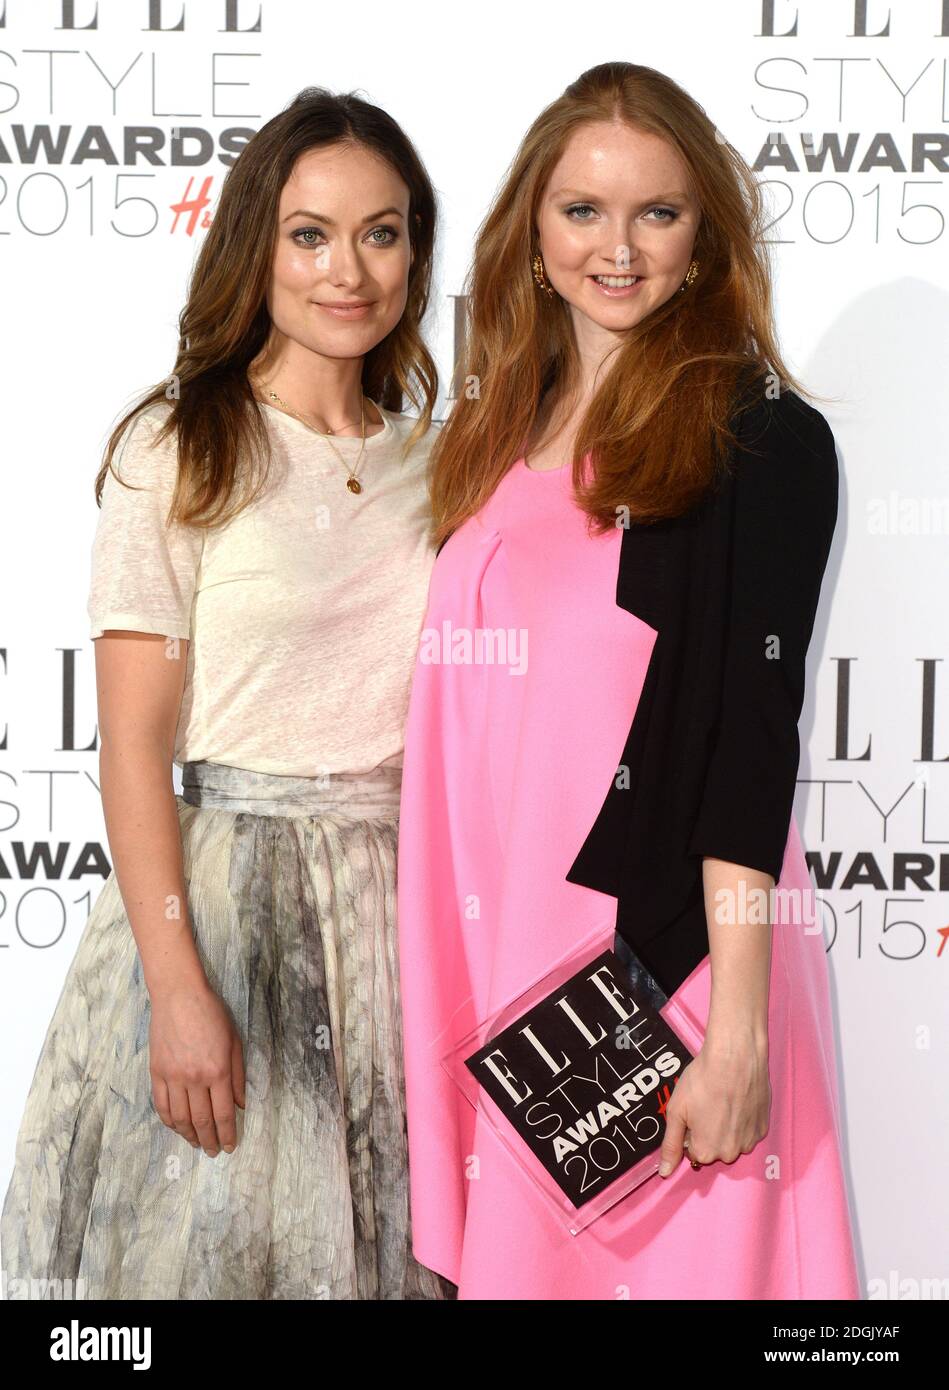 H&M Conscious Award Winner Lily Cole (presented by Olivia Wilde) backstage  at the Elle Style Awards